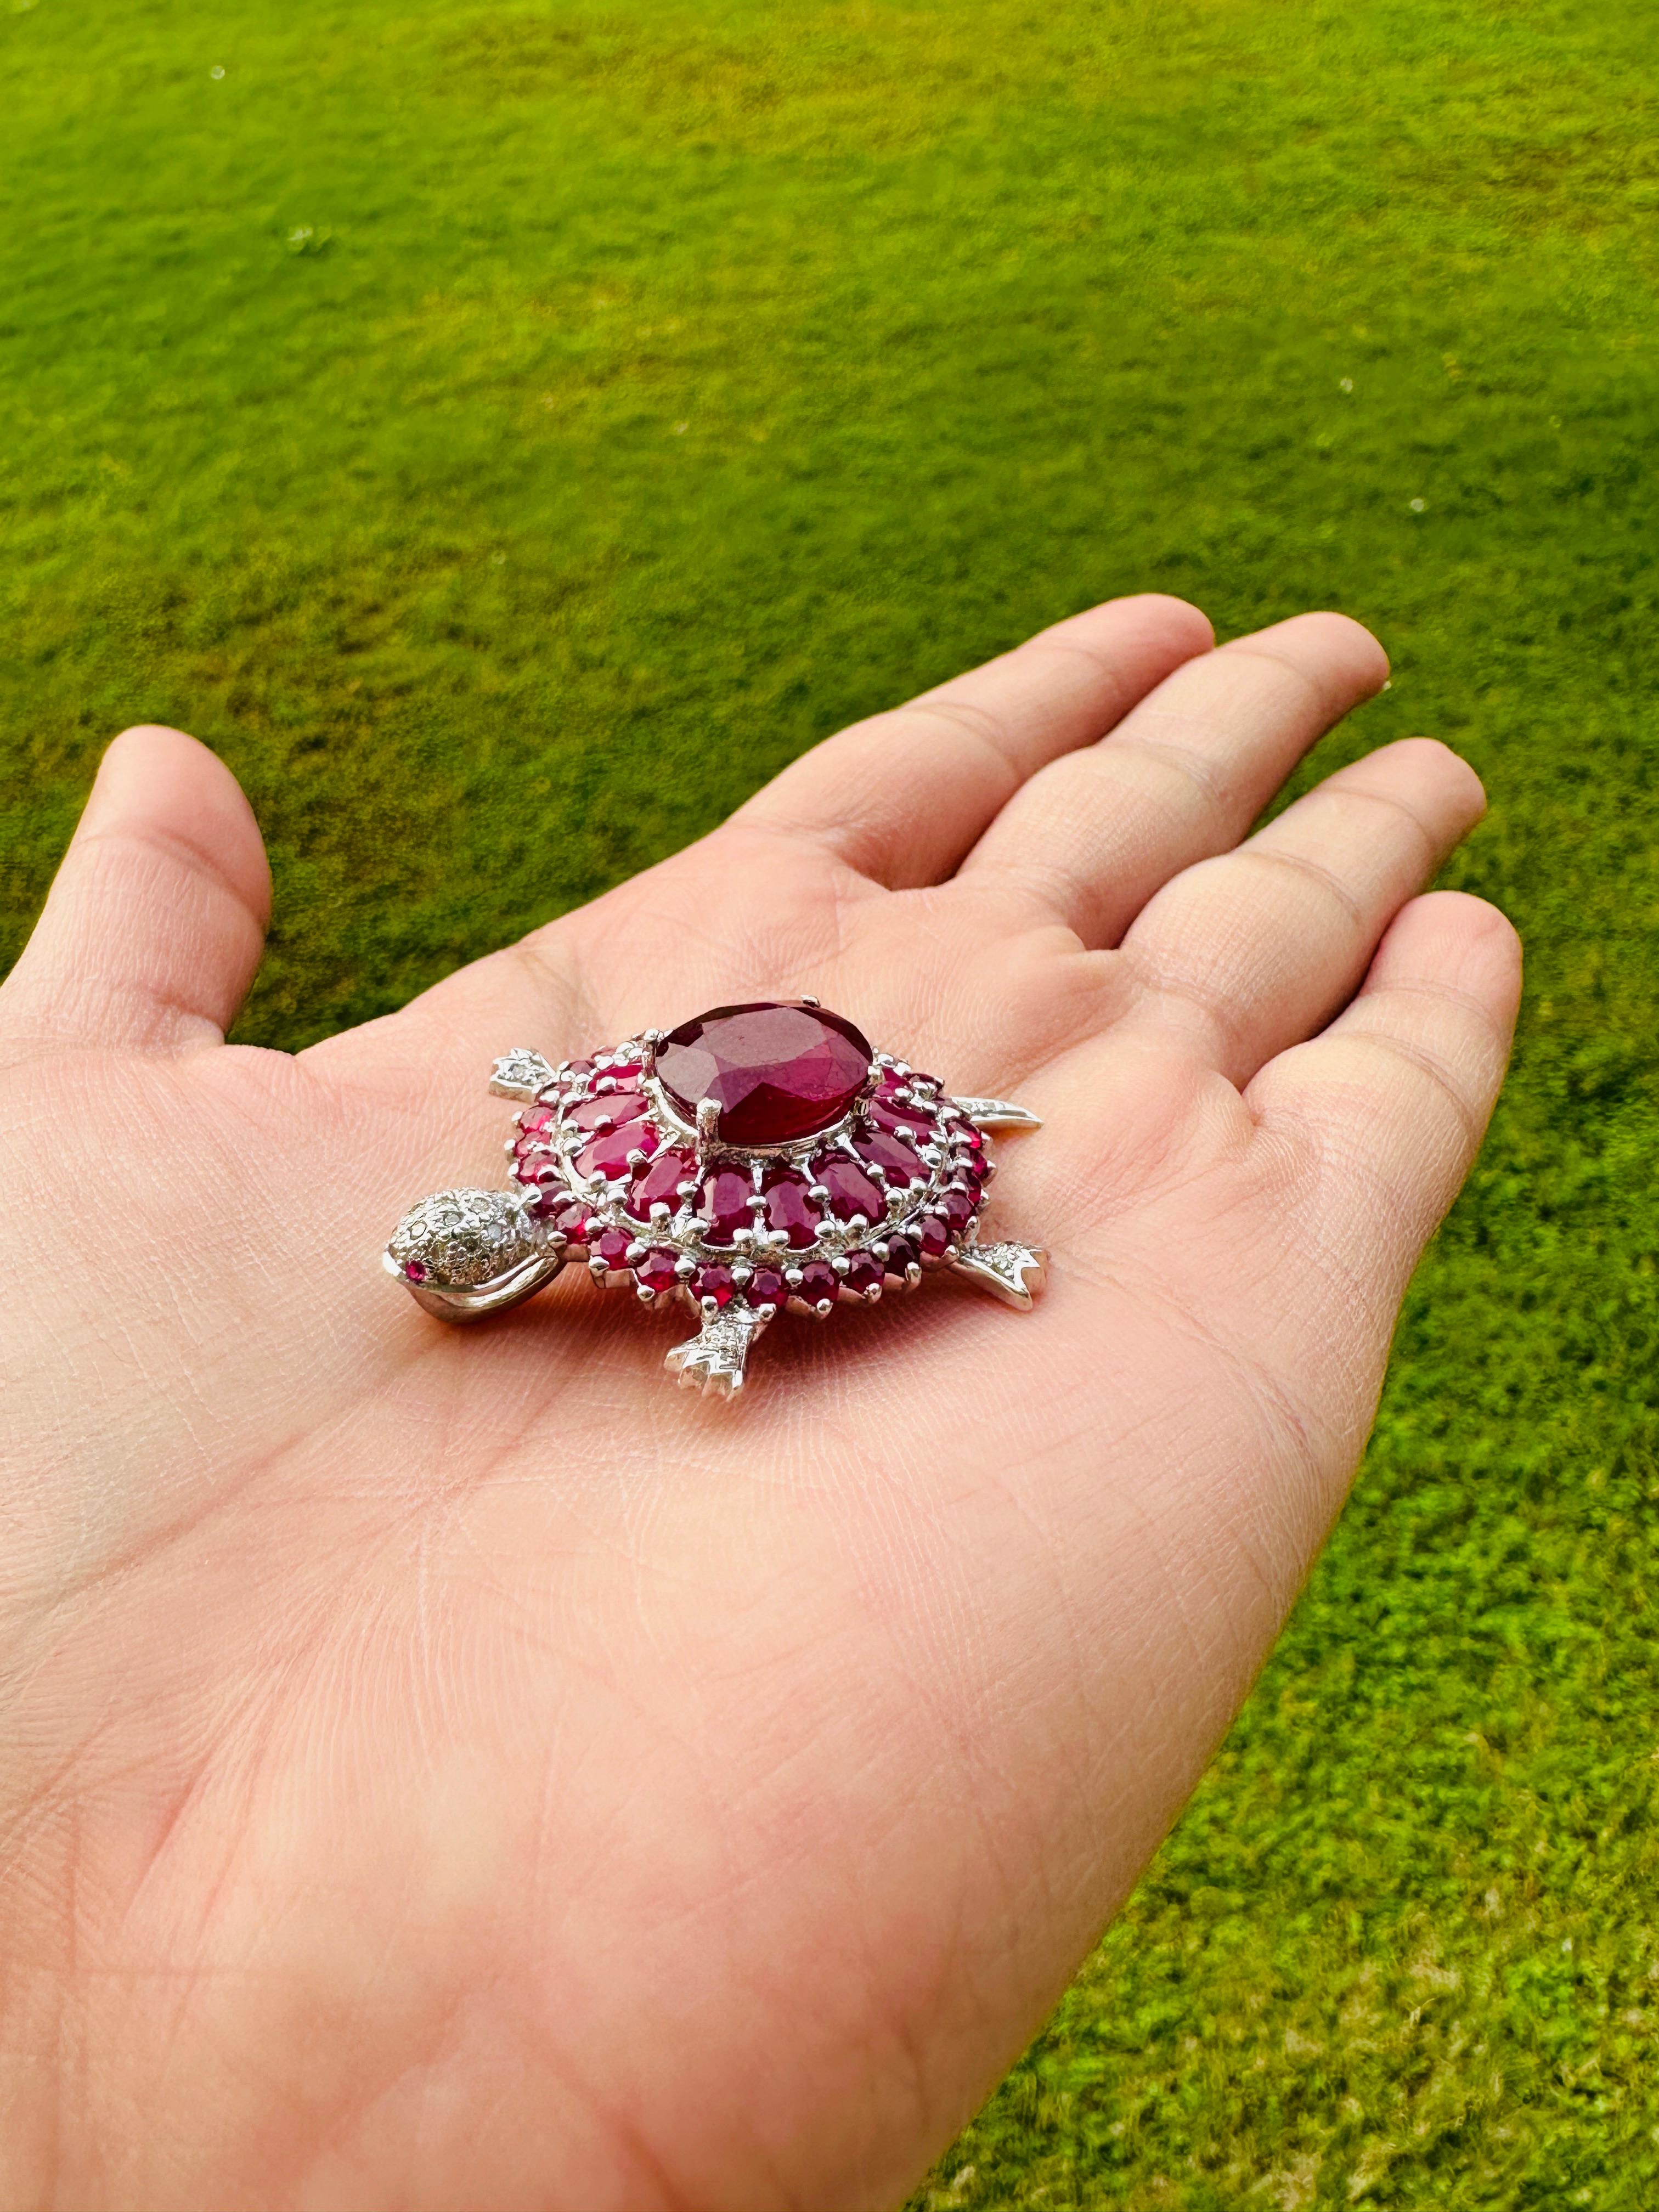 This 10.75 Carat Genuine Ruby Birthstone and Diamond Turtle Pendant is meticulously crafted from the finest materials and adorned with stunning ruby which enhances confidence, leadership qualities and attract career opportunities.
This delicate to